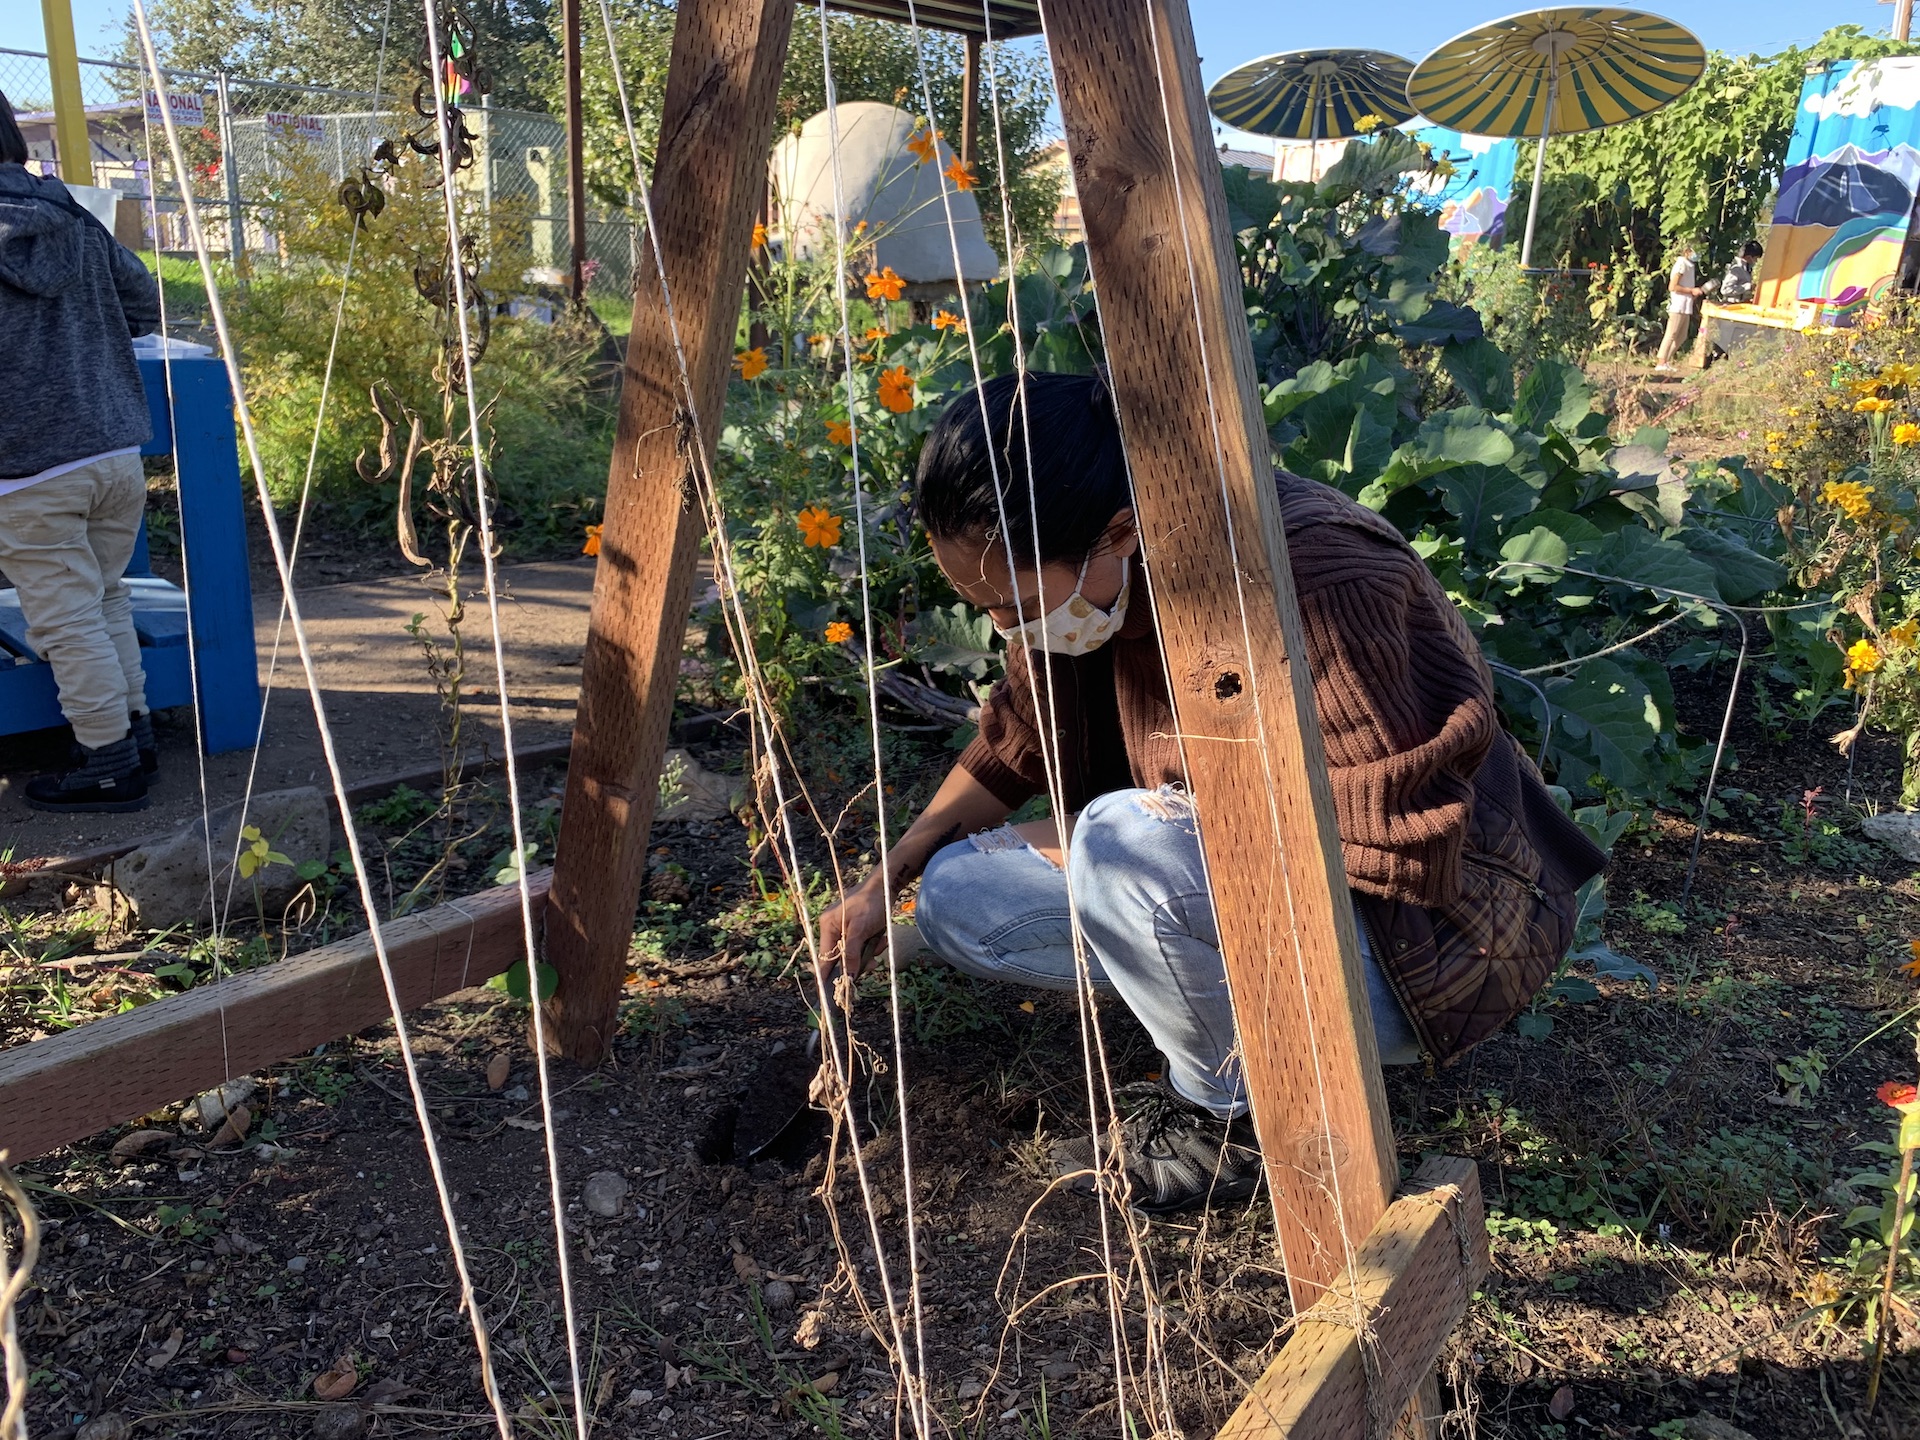 A person with dark hair and tan skin kneels beneath a trellis in a garden bed, digging a small hole with a trowel.